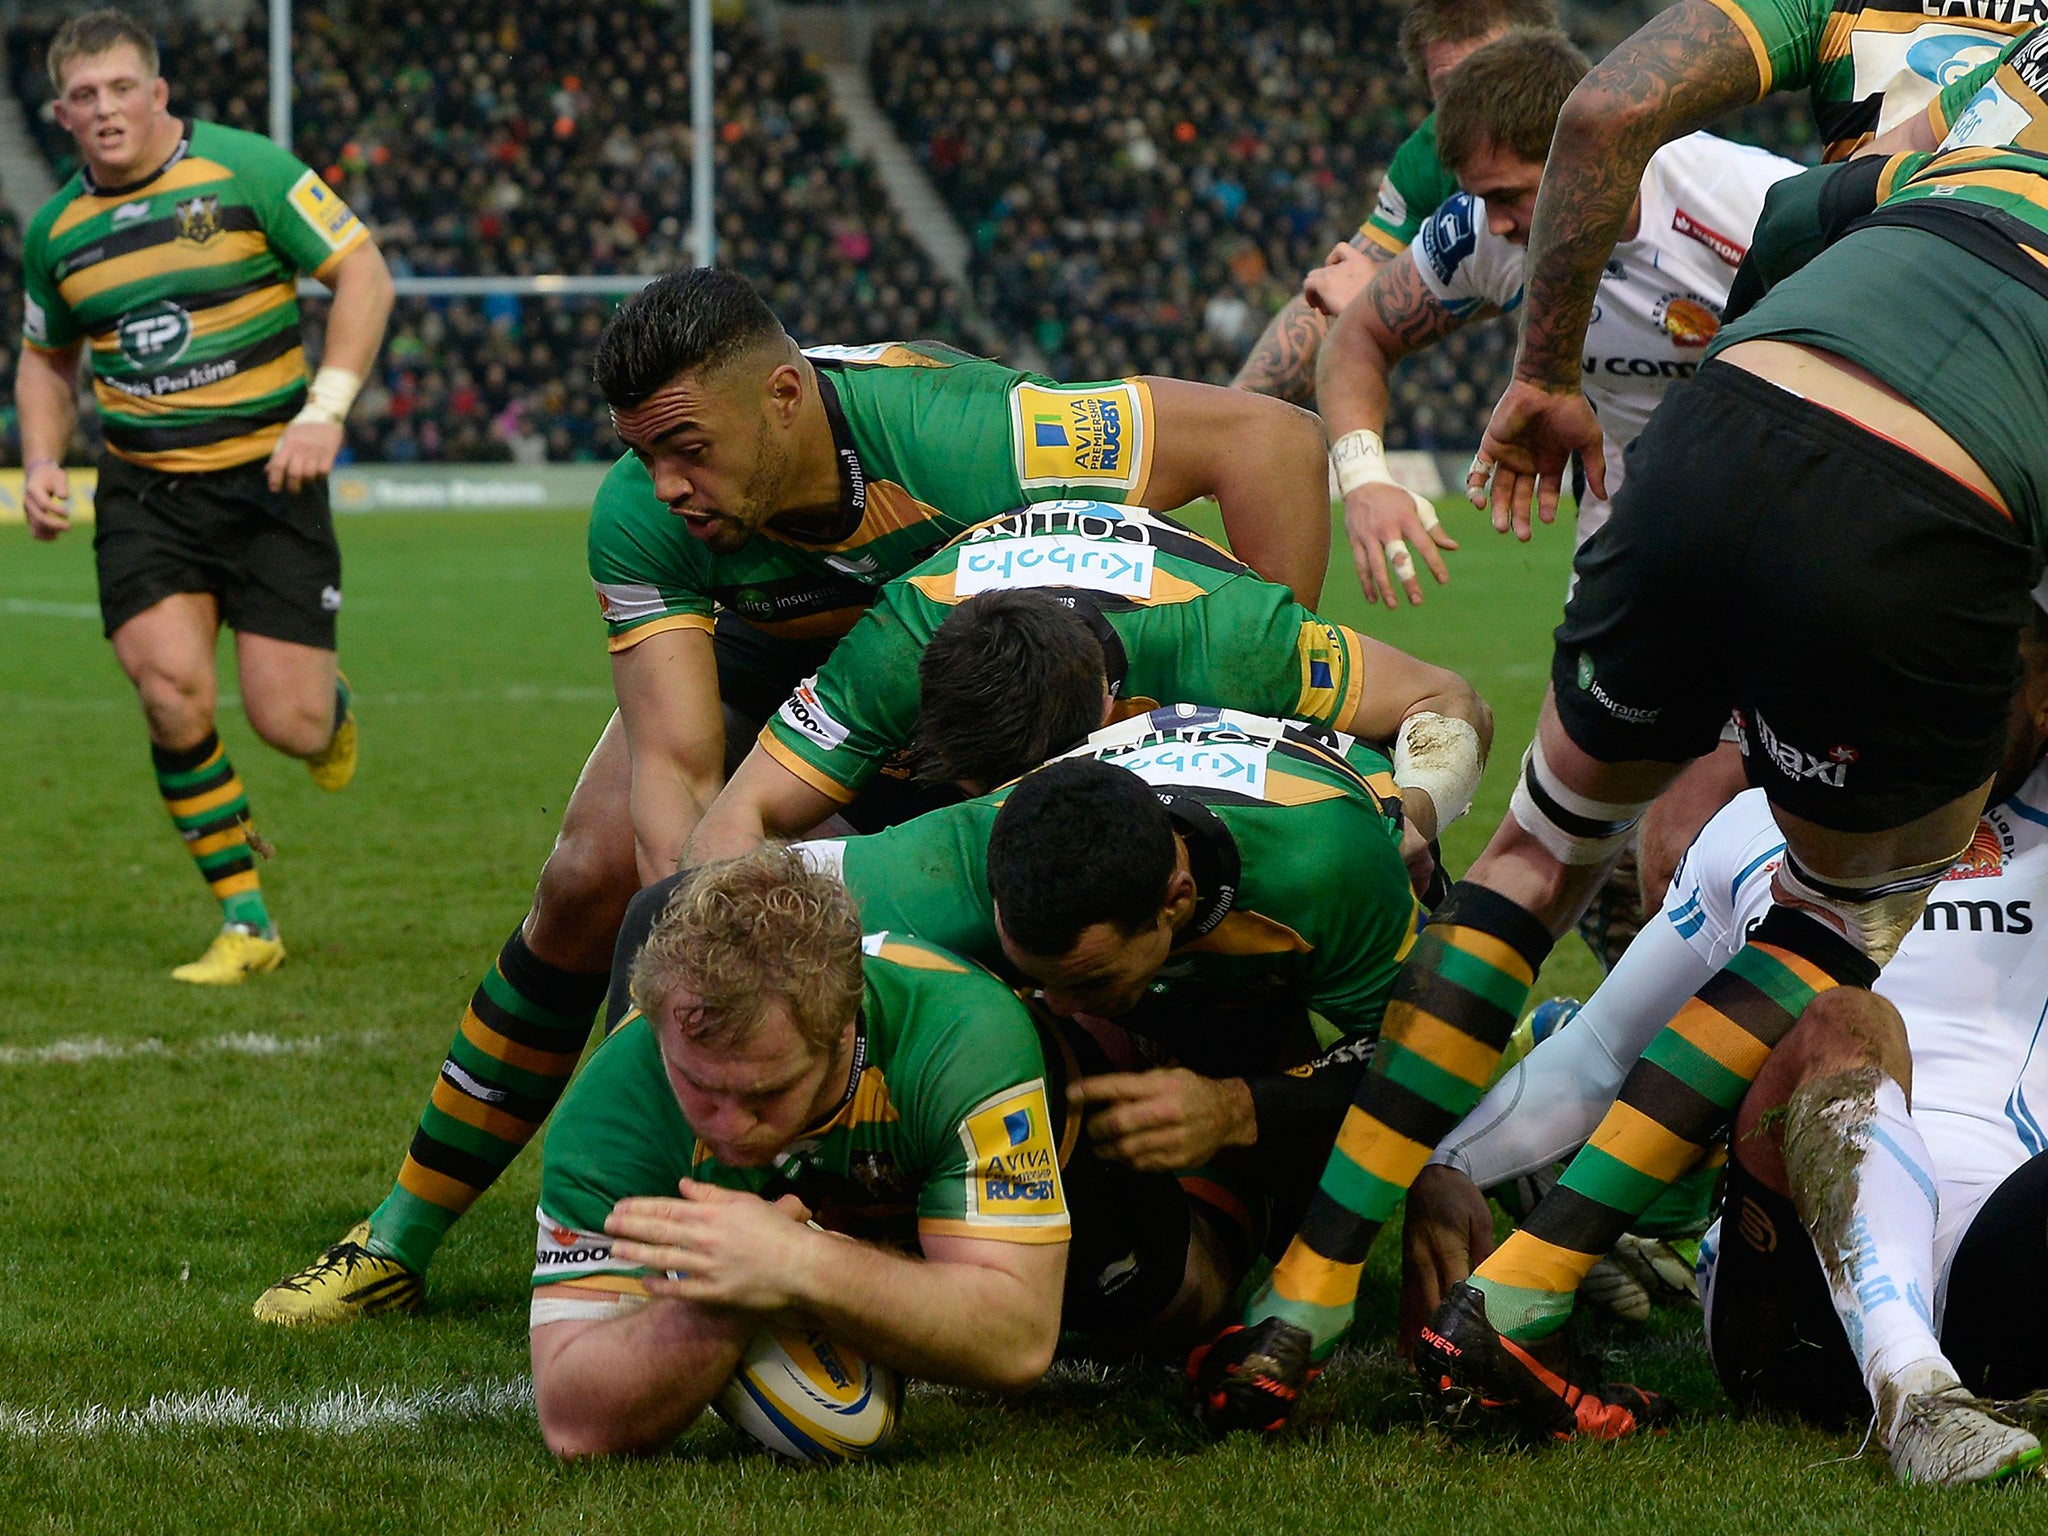 Northampton’s Mike Haywood is driven over for the only try of the match against Exeter yesterday